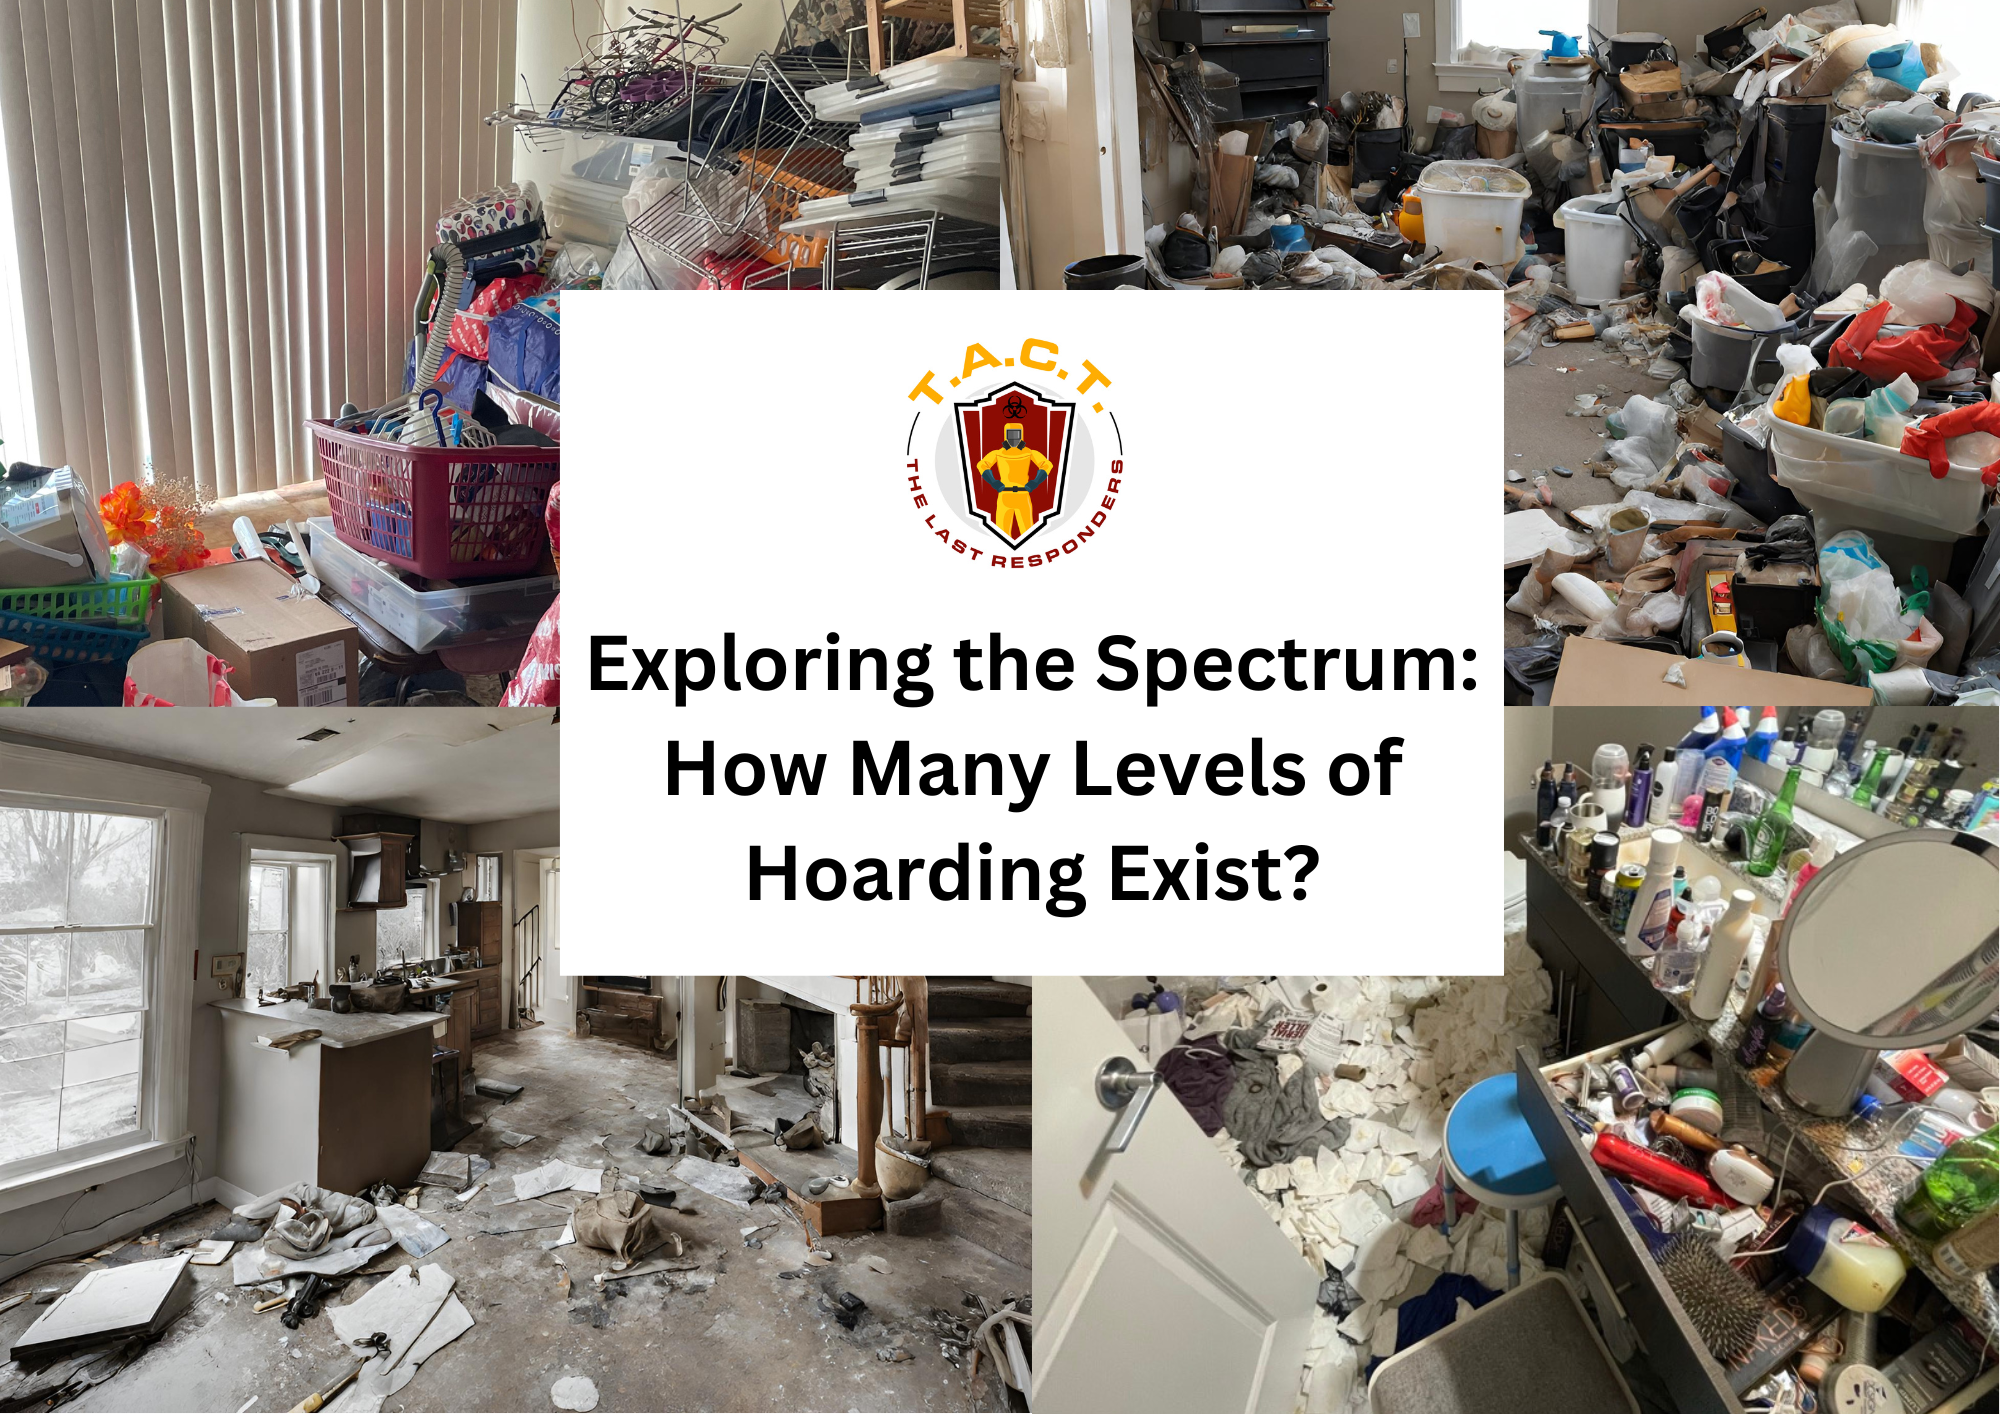 Exploring the Spectrum: How Many Levels of Hoarding Exist?